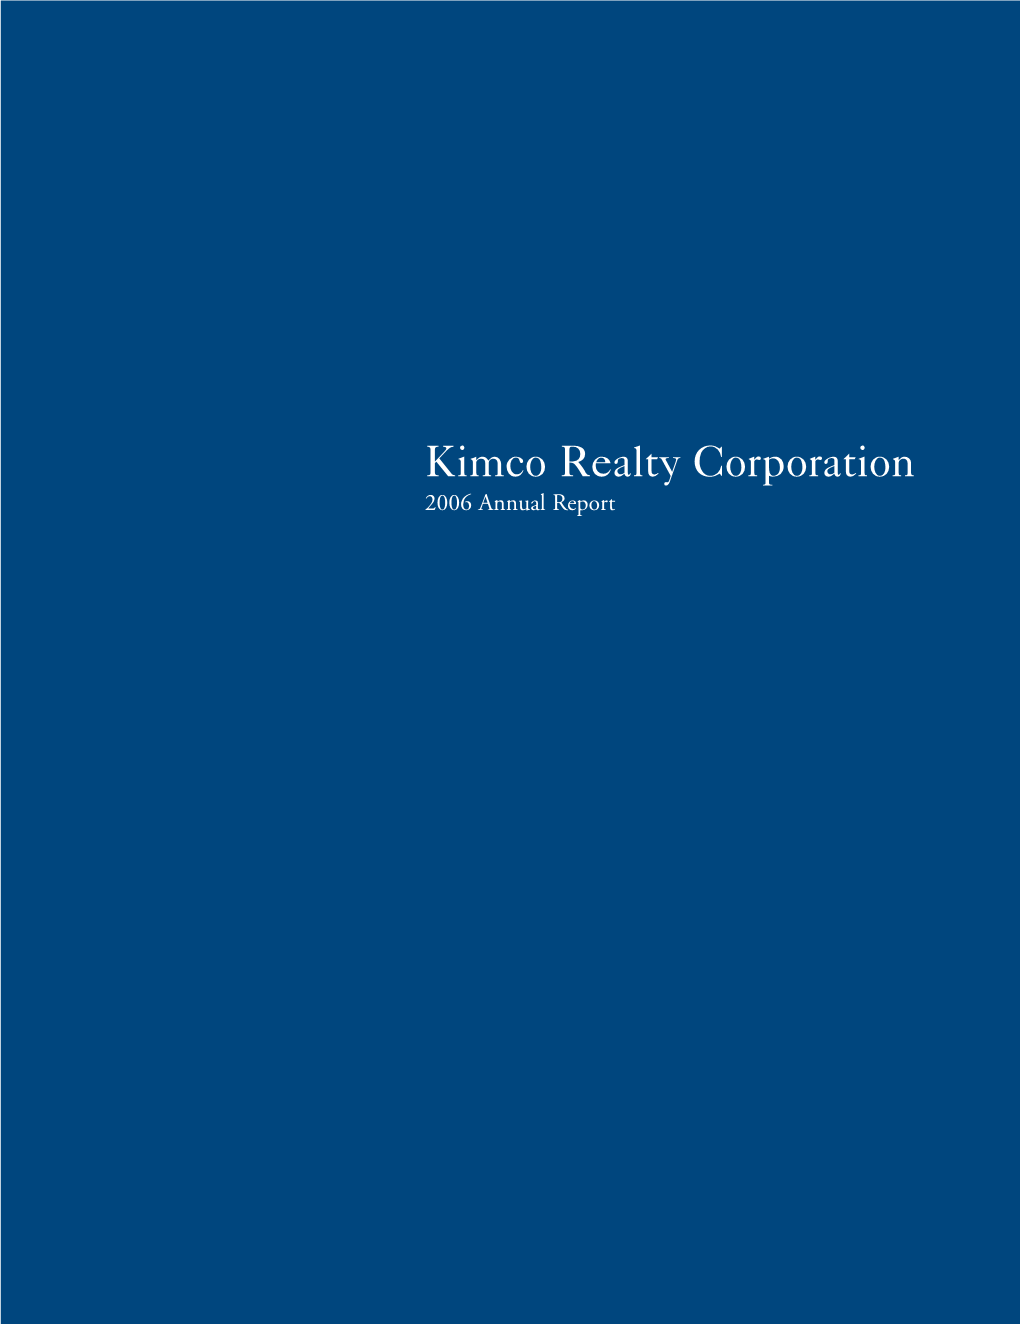 Kimco Realty Corporation 2006 Annual Report HISTORICAL TOTAL RETURN ANALYSIS (November 1991 to February 2007)